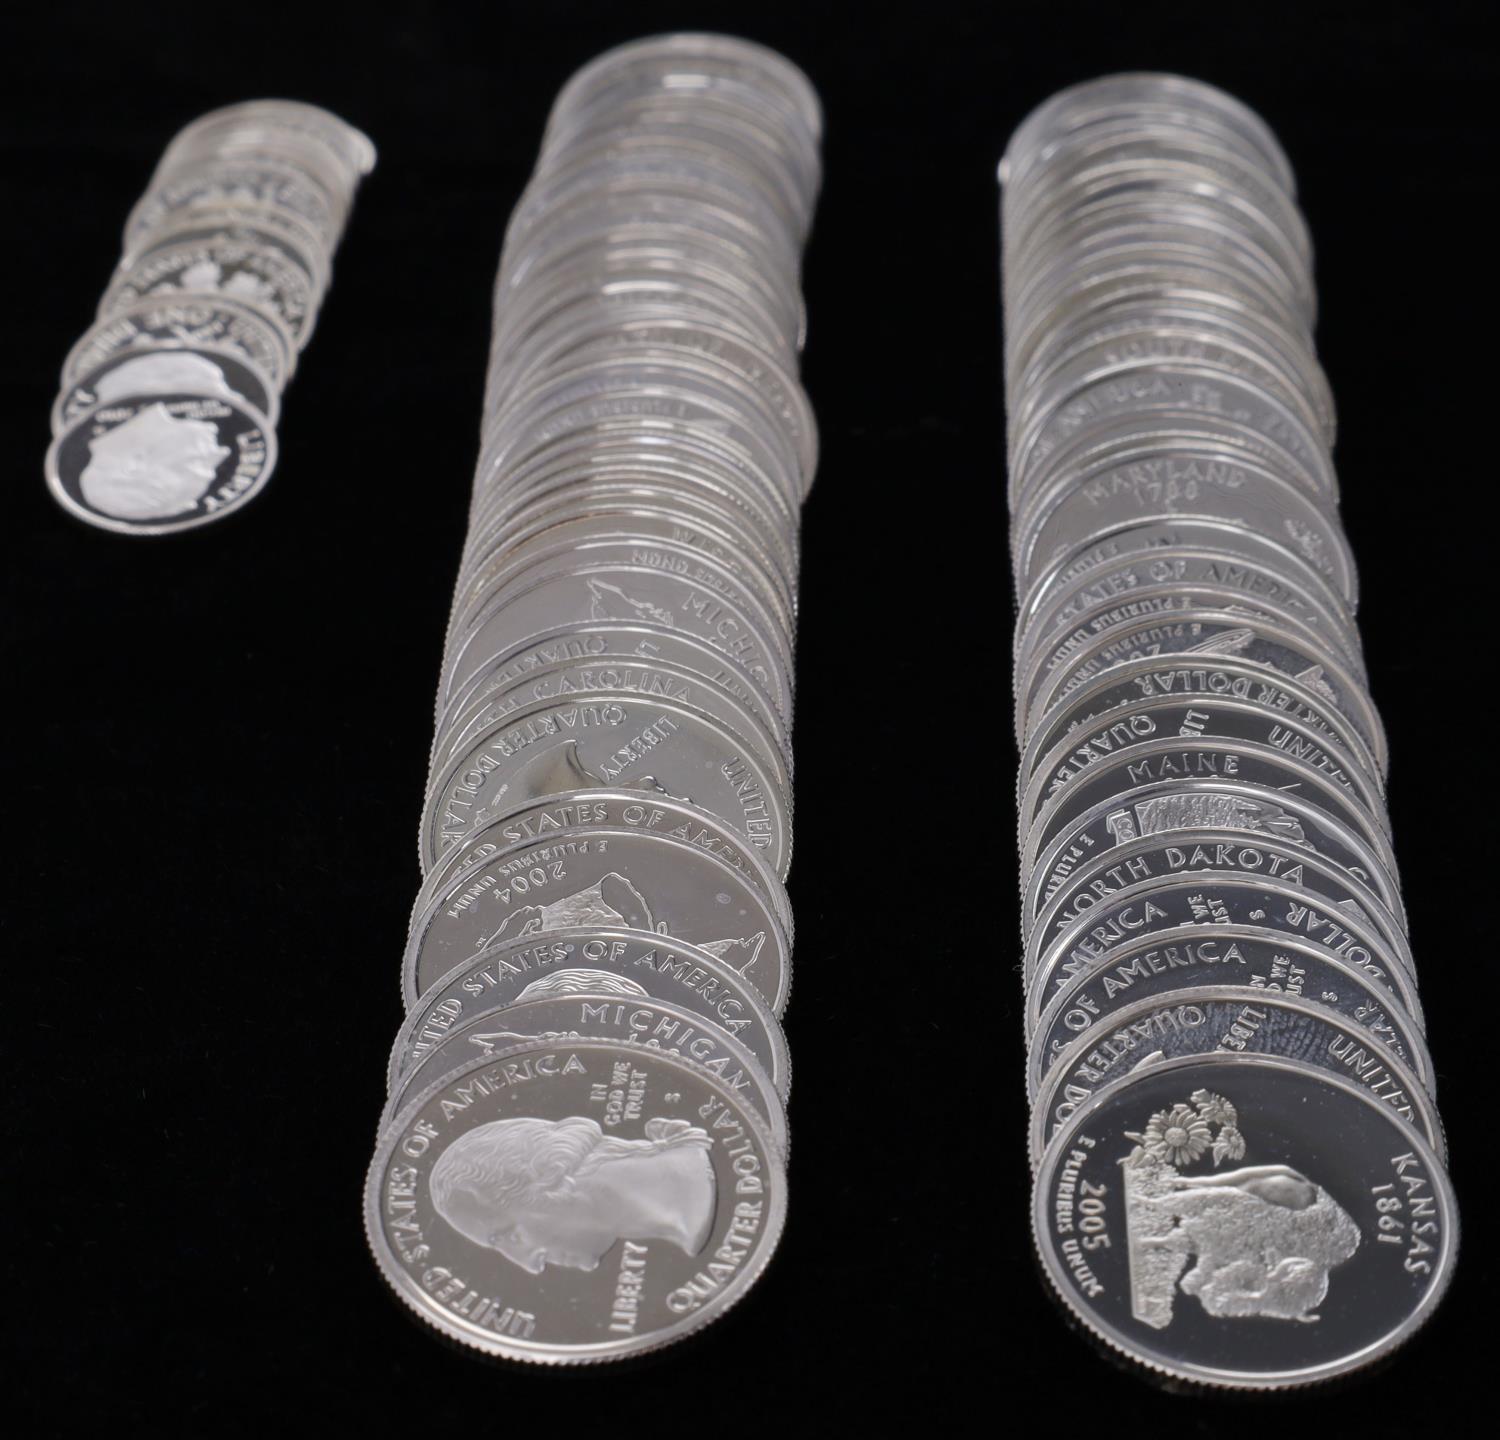 $21.20 FACE VALUE PROOF SILVER STATE QUARTER COINS